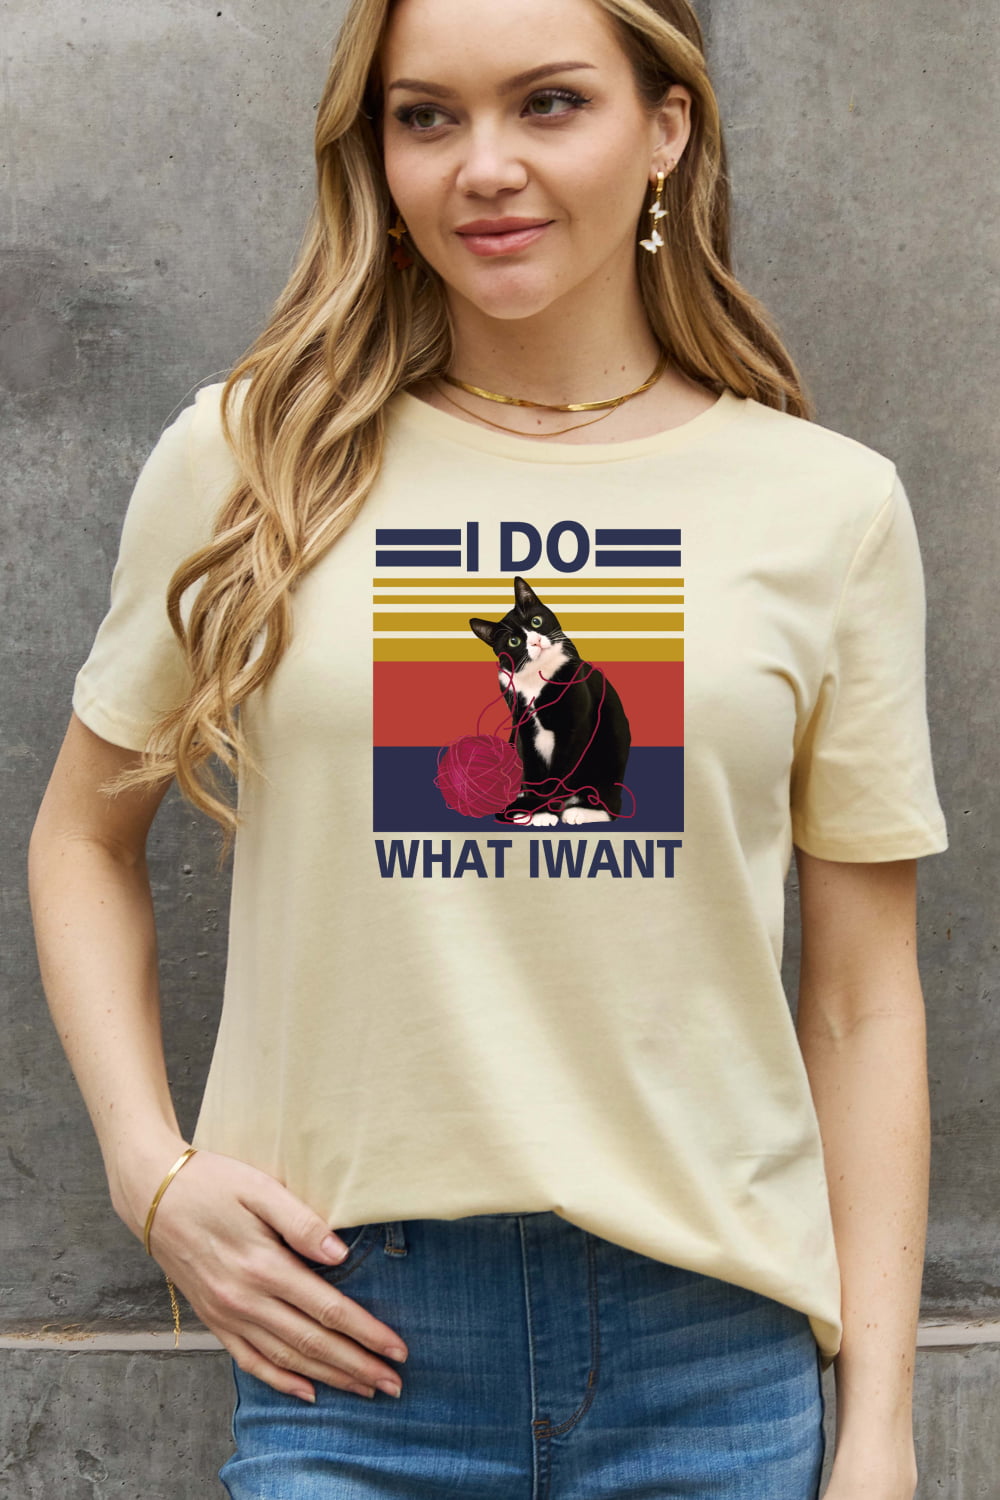 I DO WHAT I WANT Graphic Cotton Tee